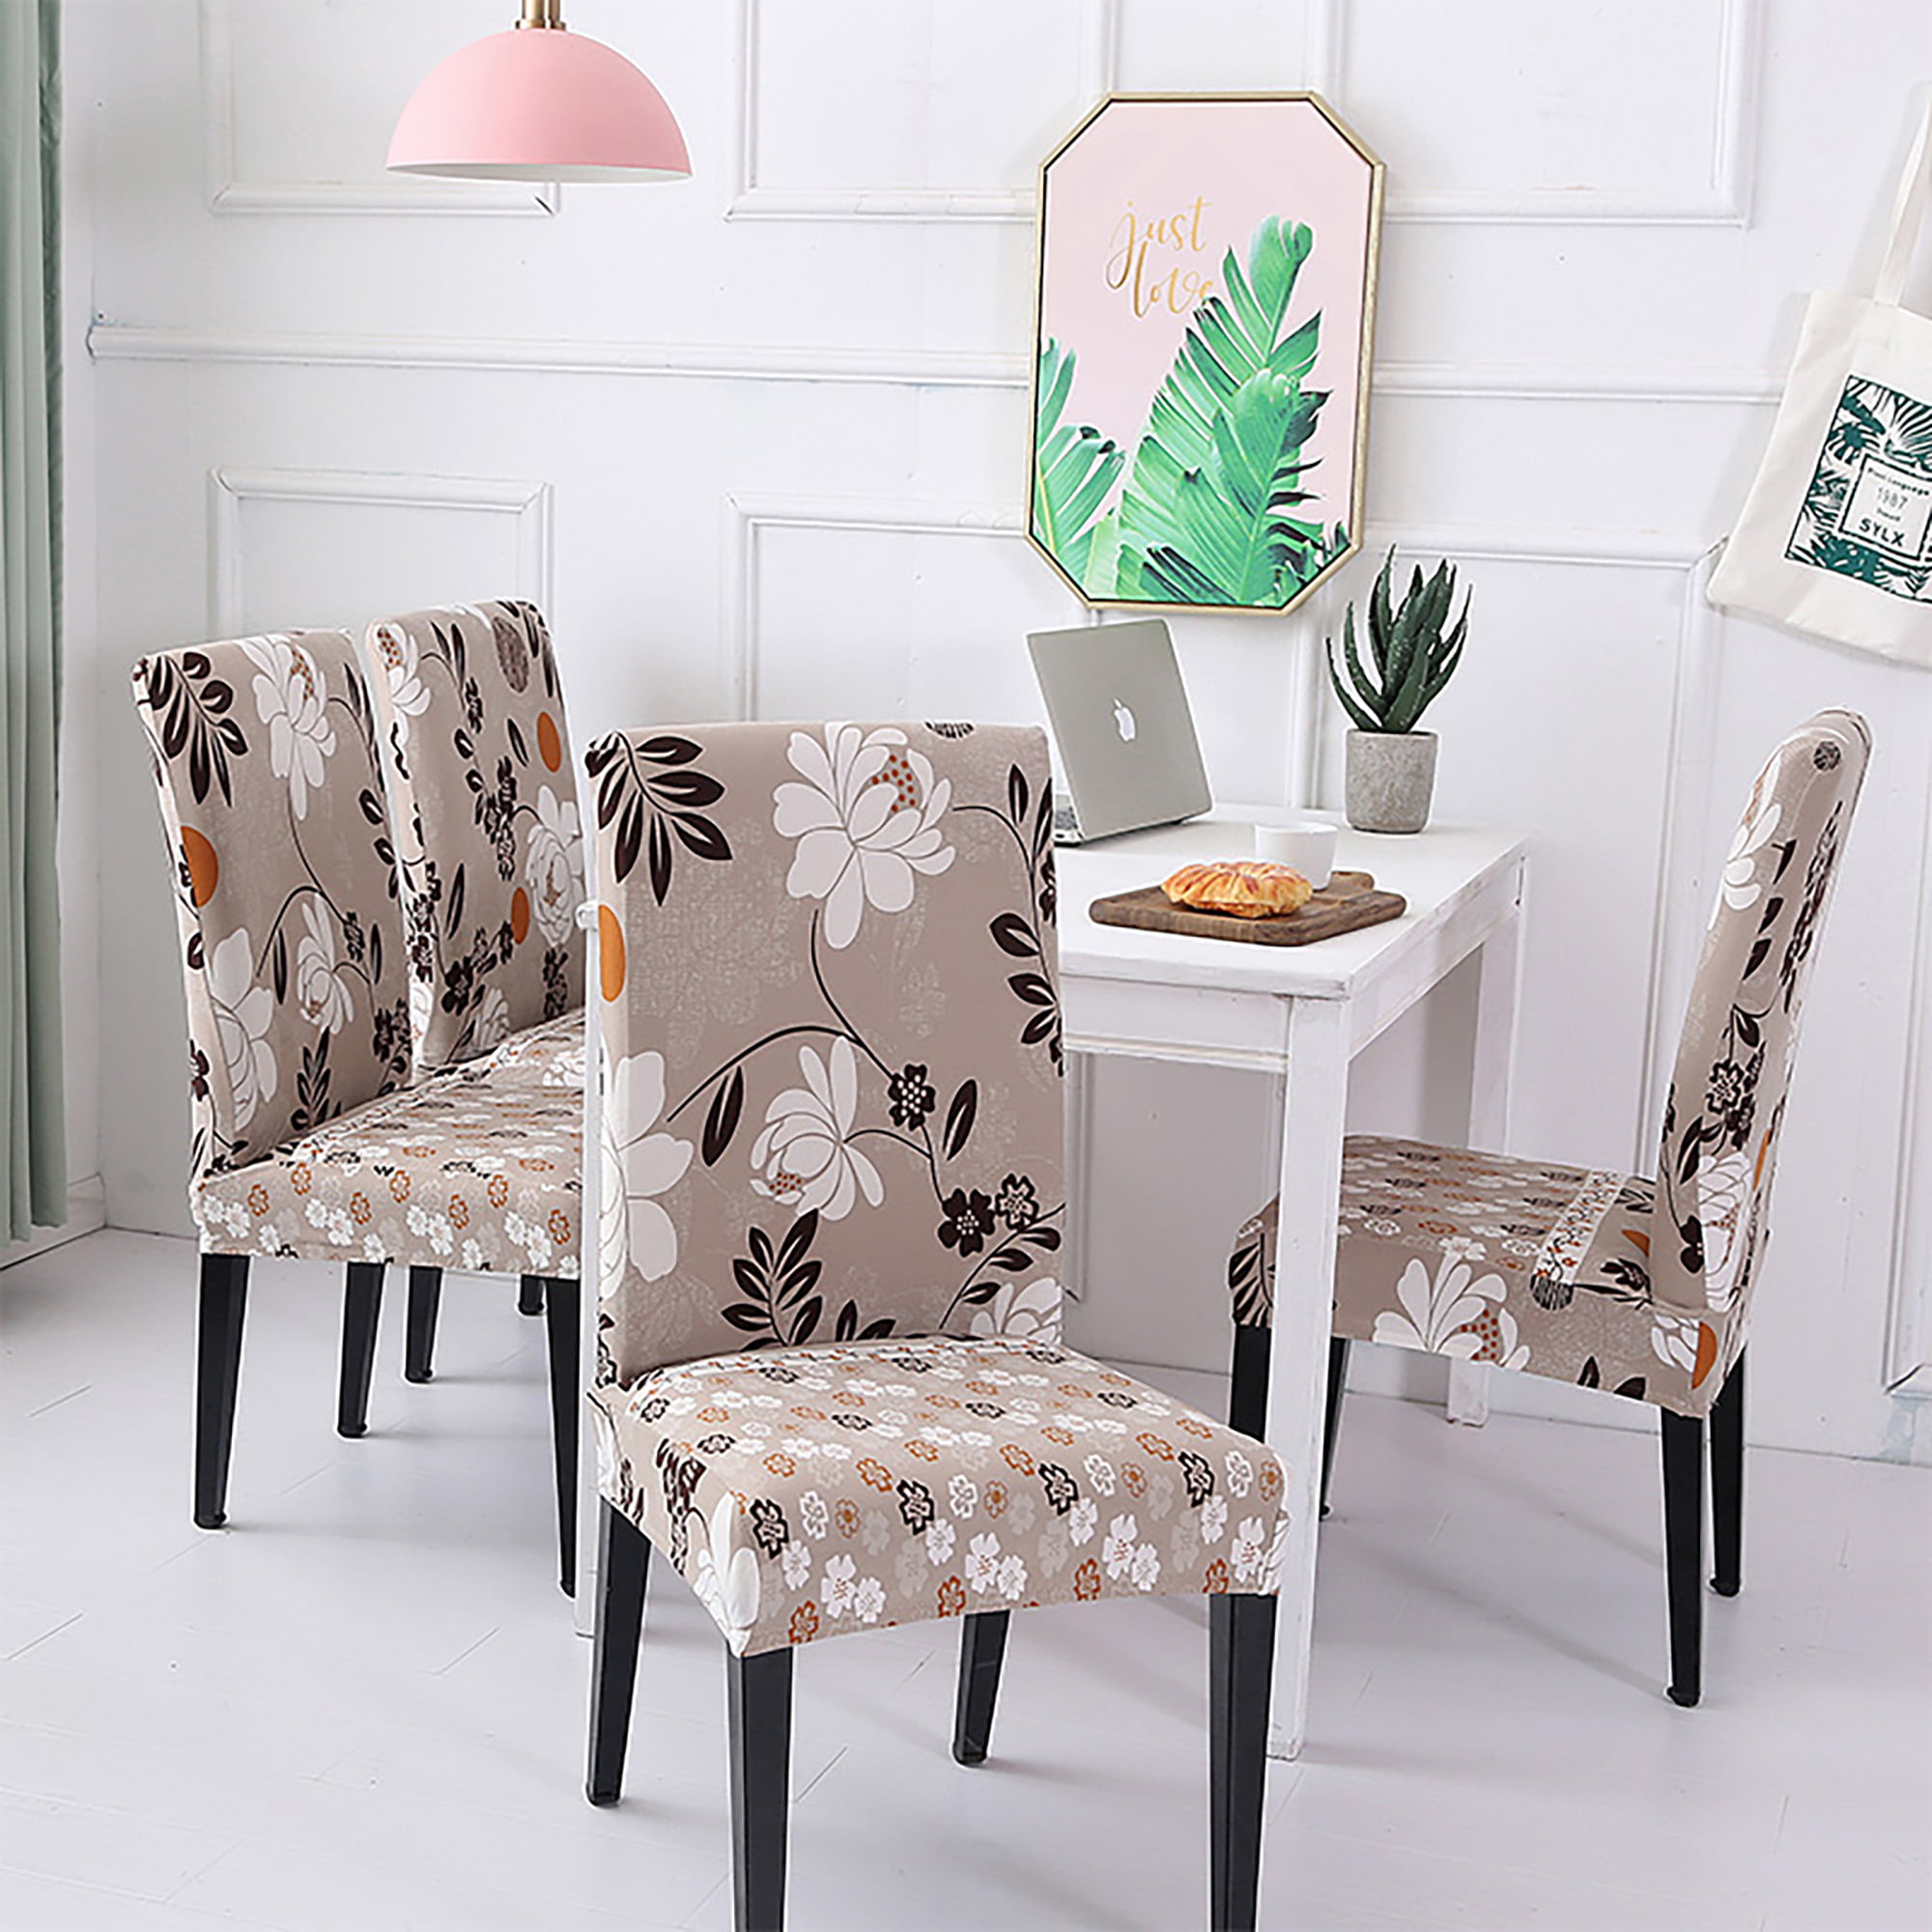 Soft Stretch Dining Room Chair Covers Pattern Banquet Seat Protector Slipcovers